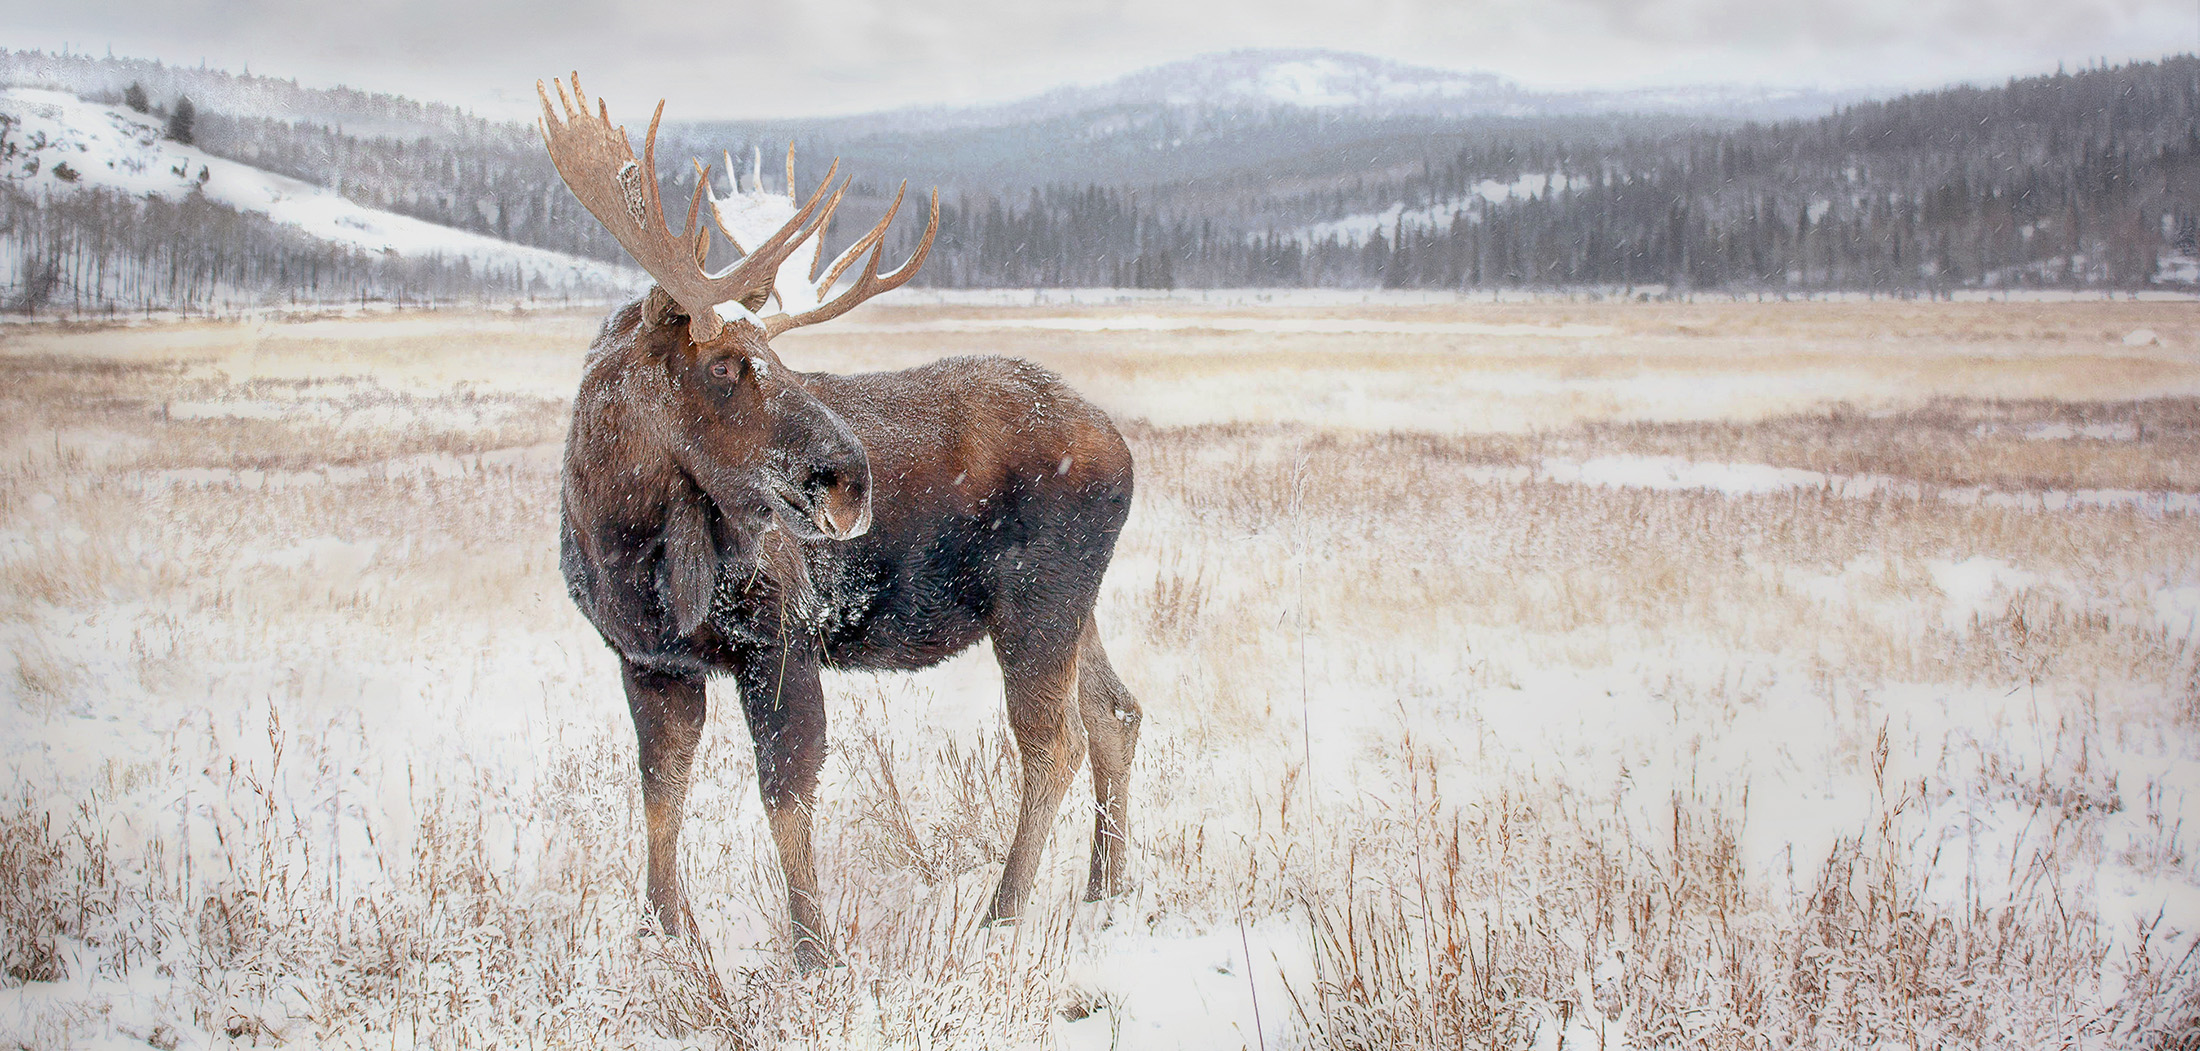 NAME A MOOSE AFTER YOUR MOM? YES, YOU CANADA